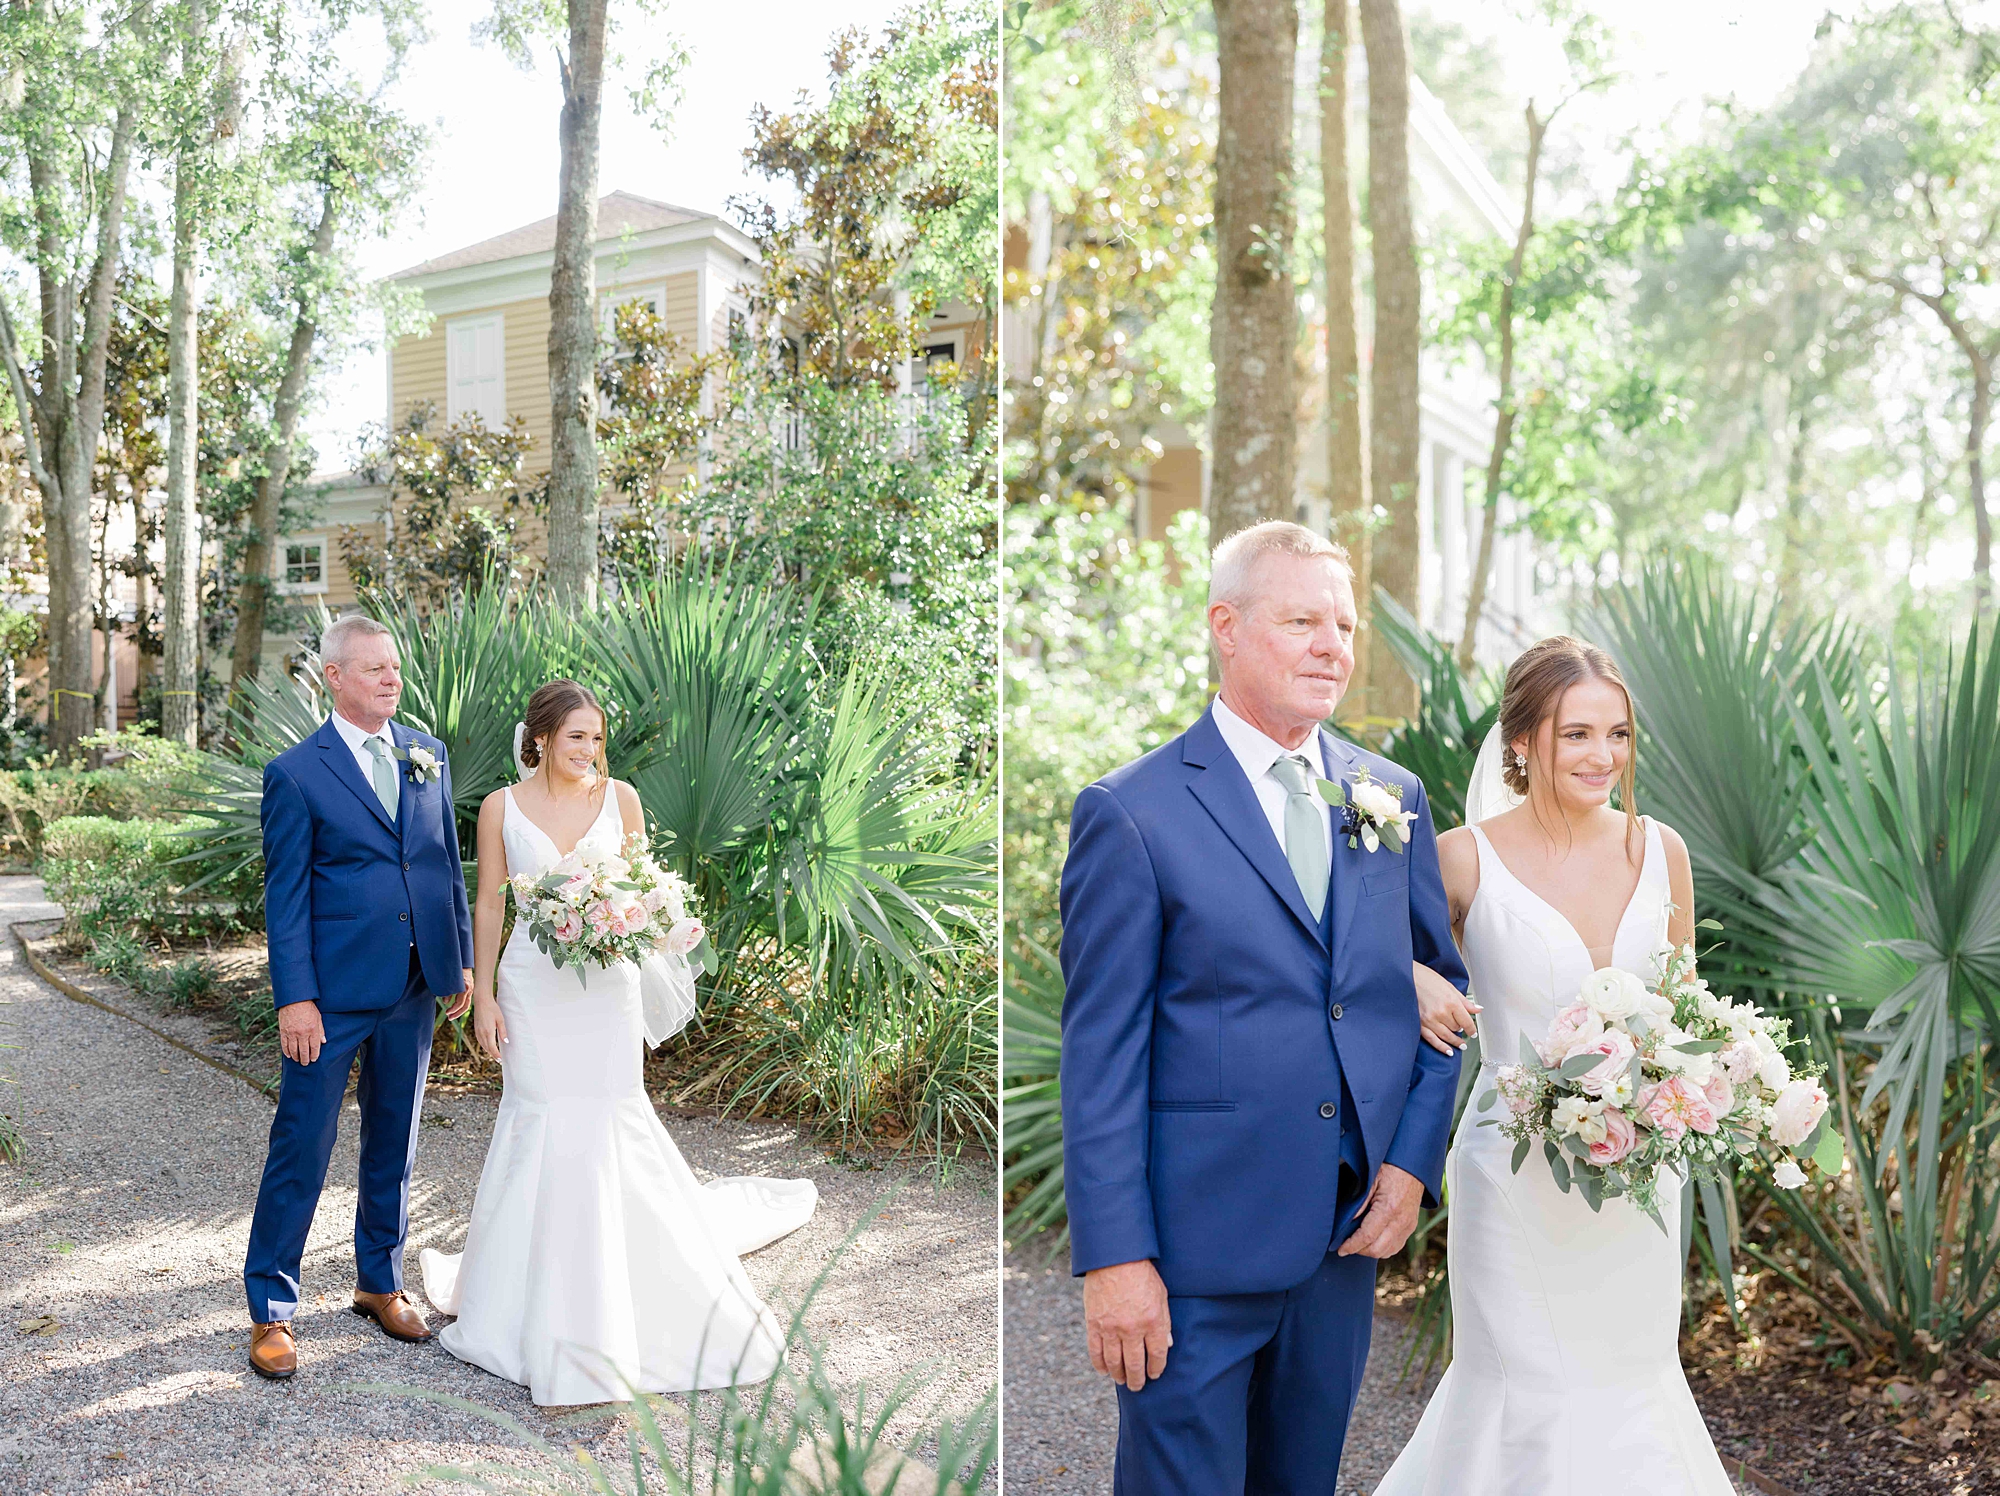 dad and bride wait to walk up aisle during ceremony 